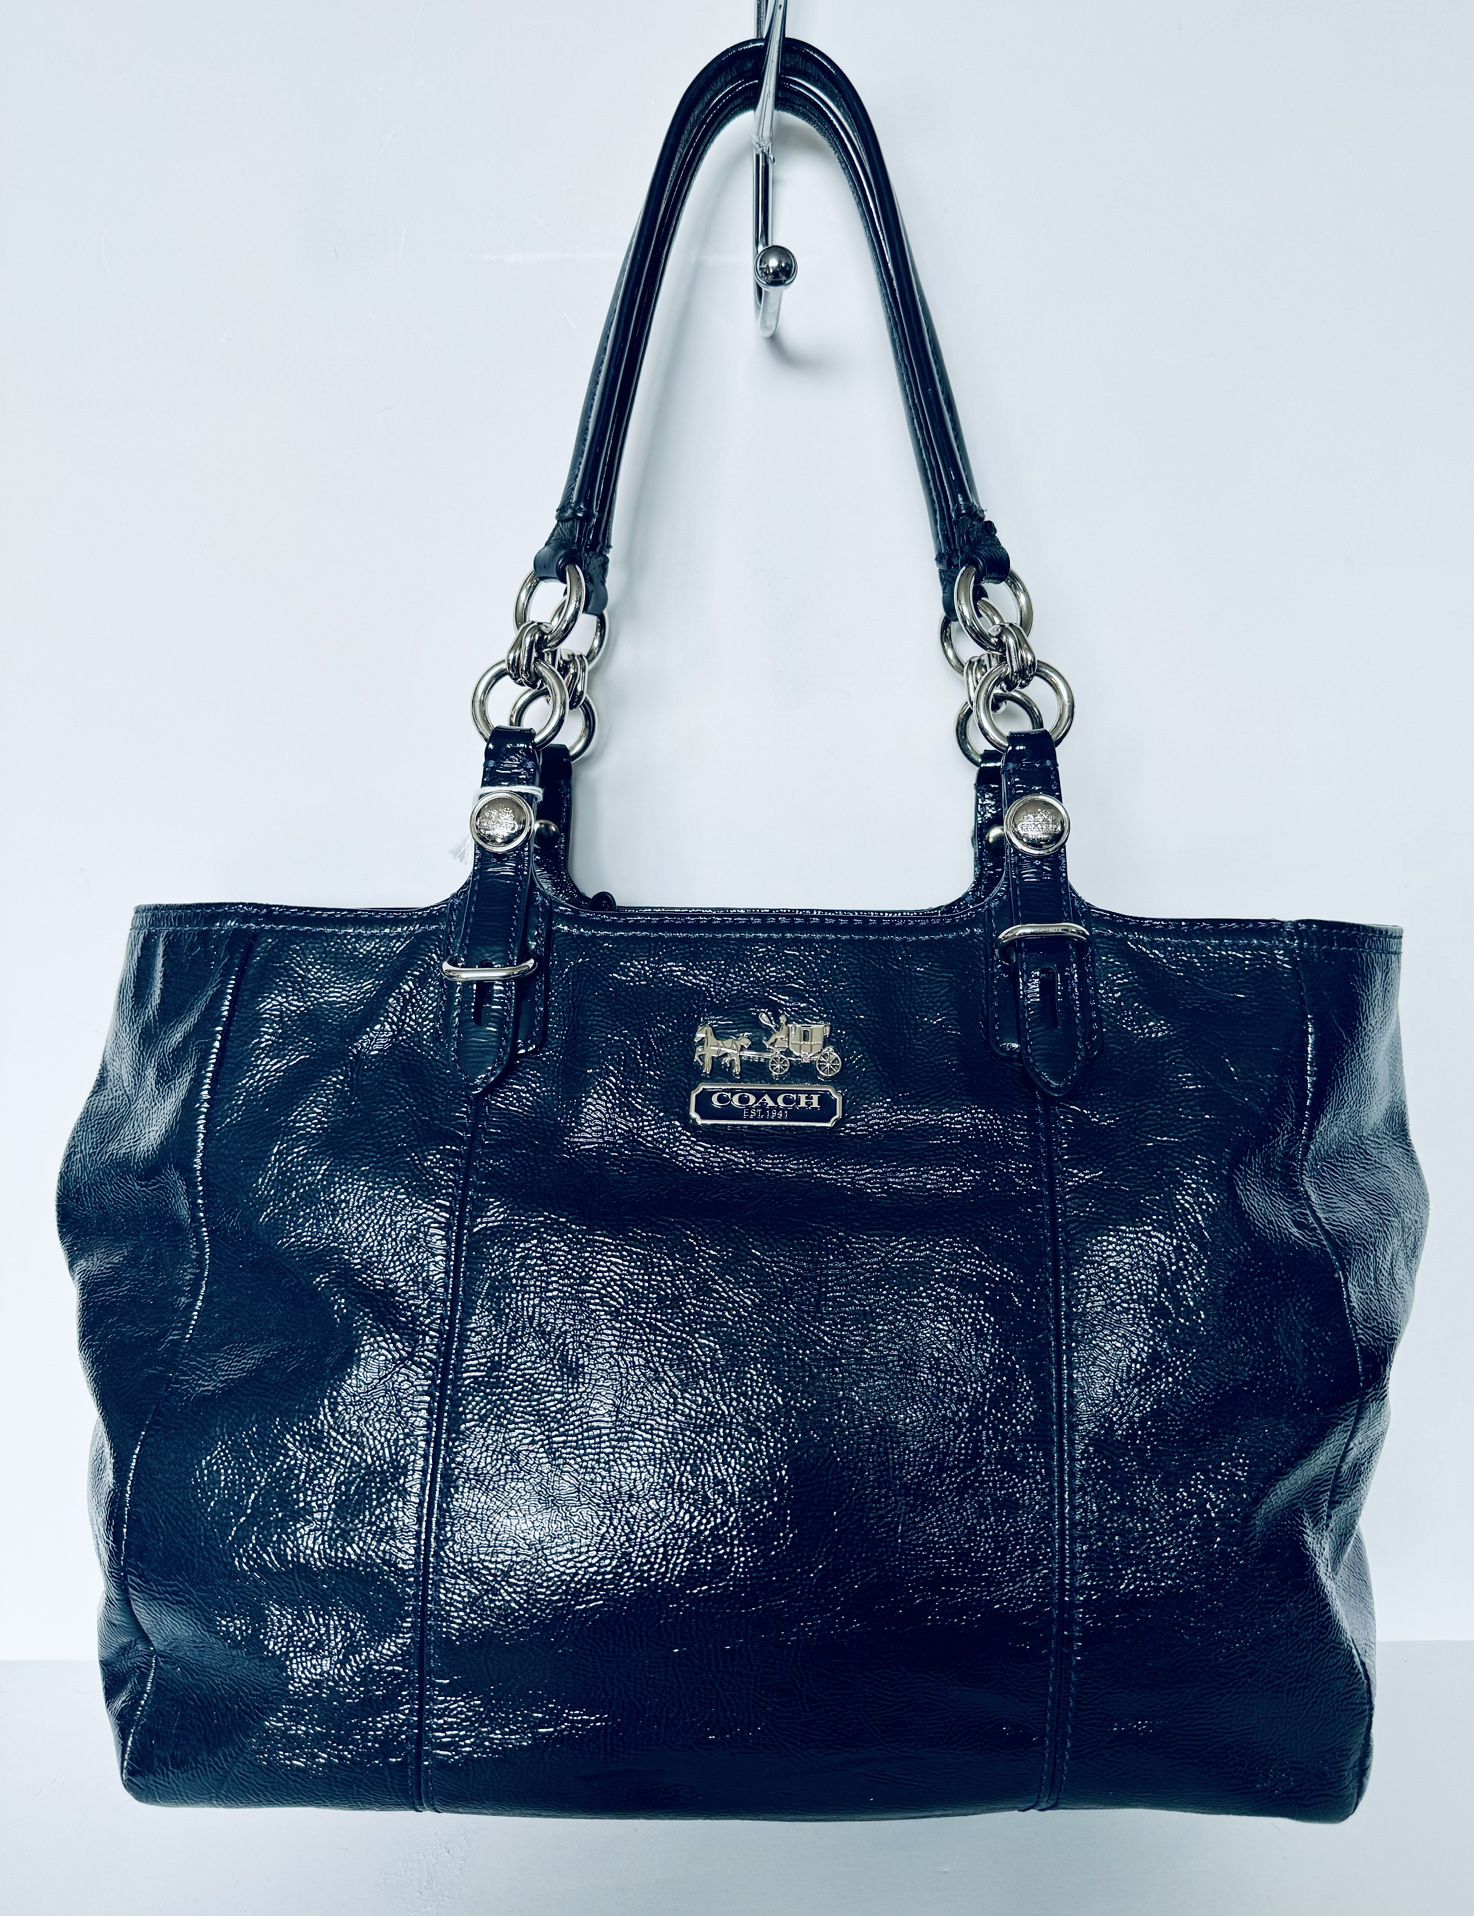 COACH Madison Mia Patent Leather Tote Shoulder Bag Navy Blue NEW $(contact info removed)8 COA